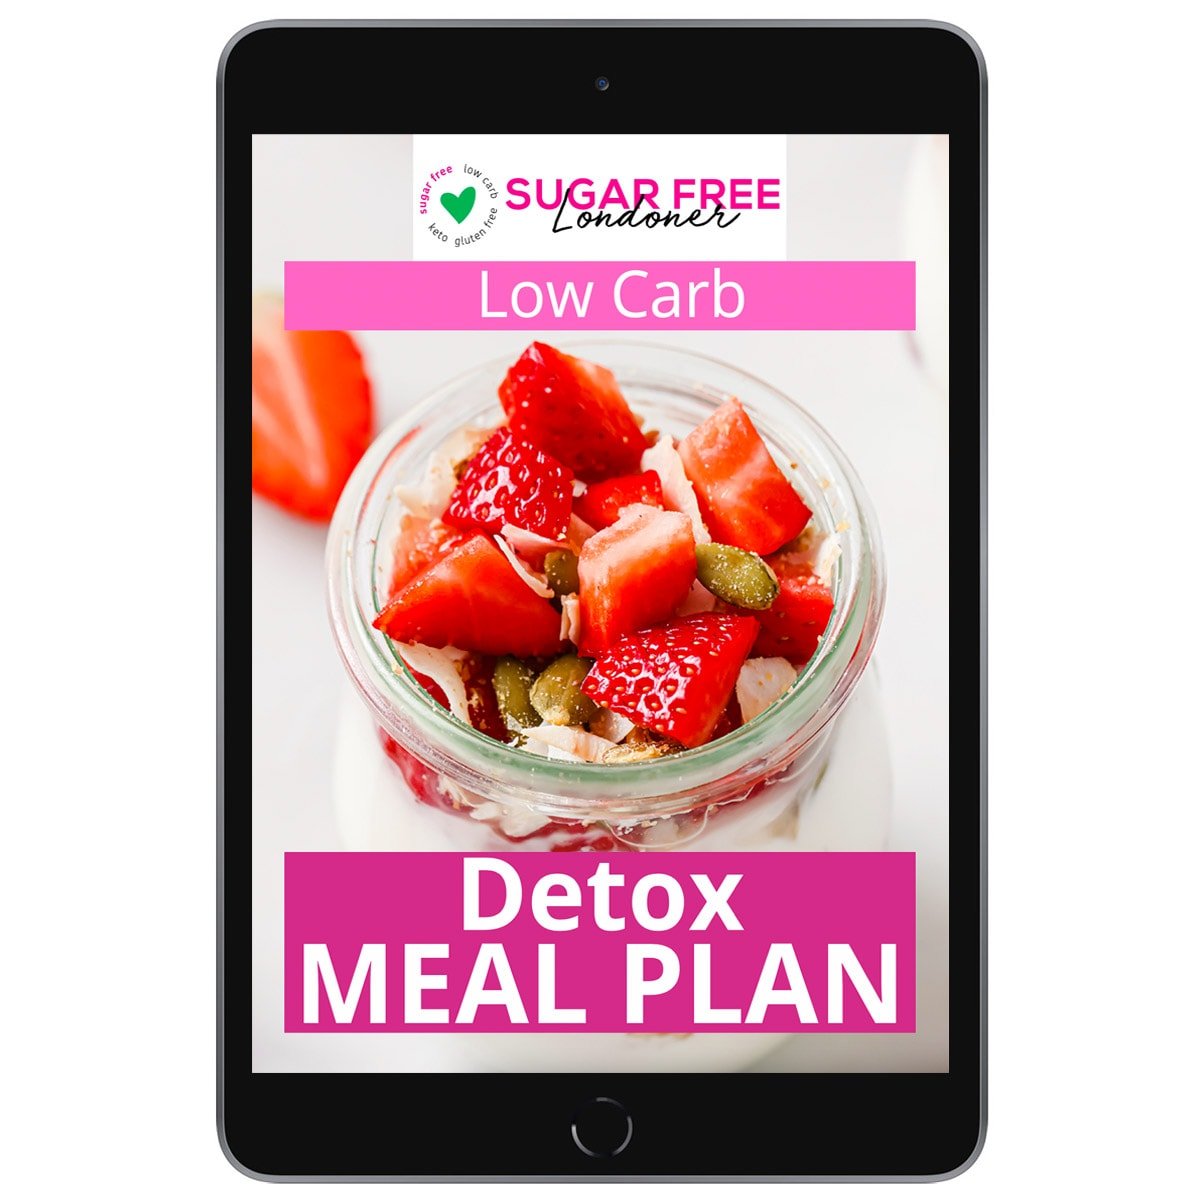 Mockup of a smartphone with the title page of the detox meal plan showing on the screen.